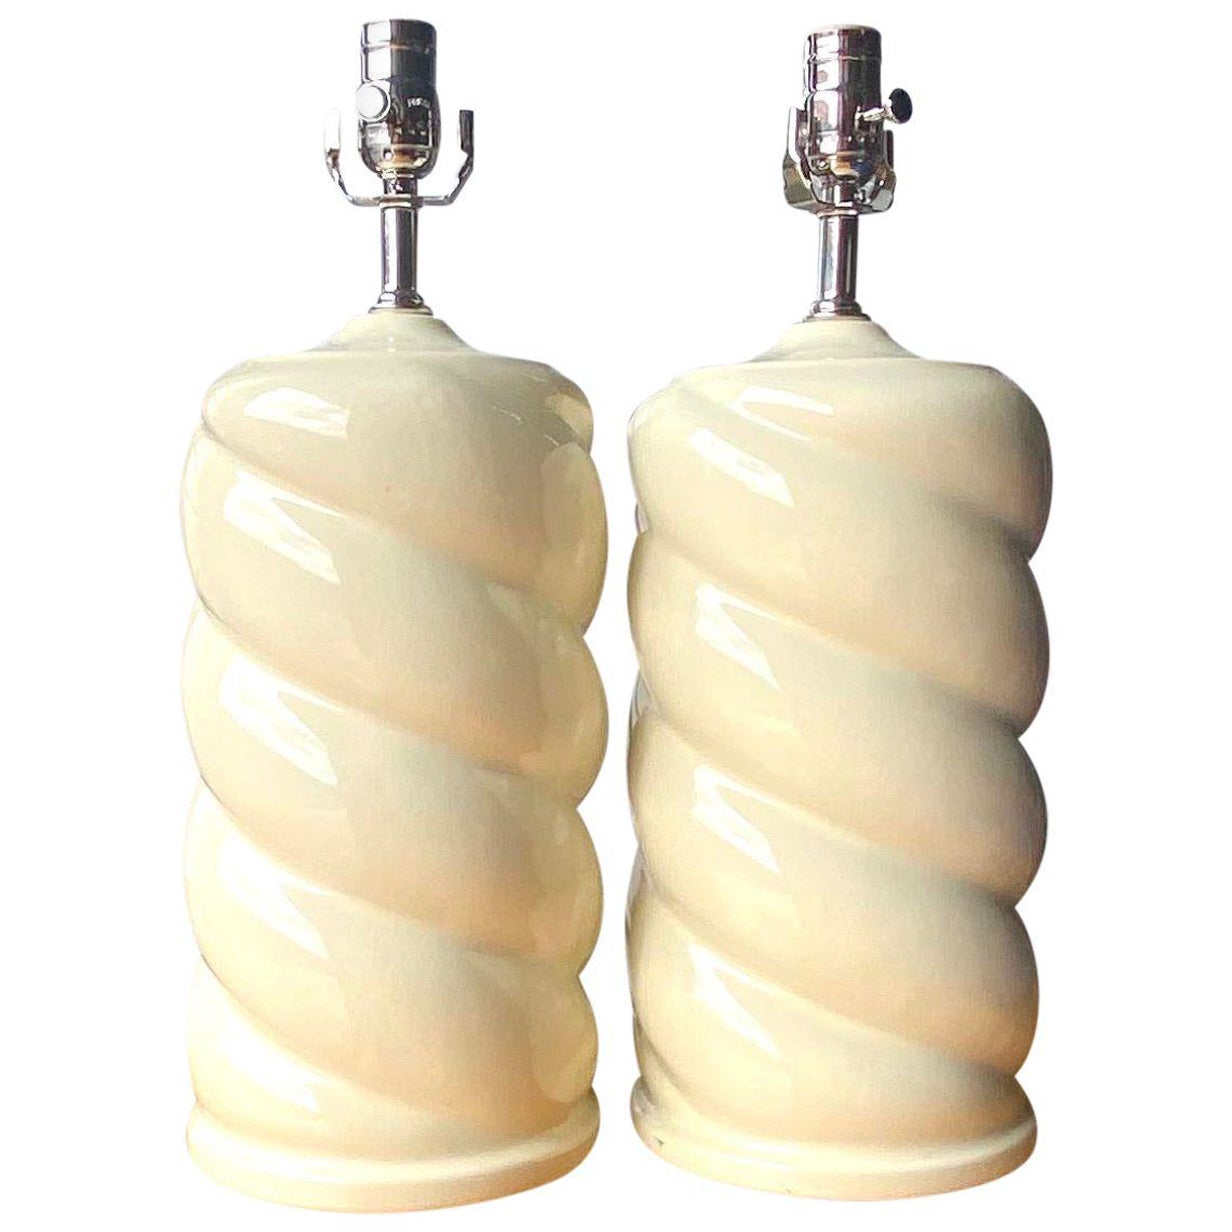 Contemporary 70s Twist Ceramic Lamps - a Pair For Sale